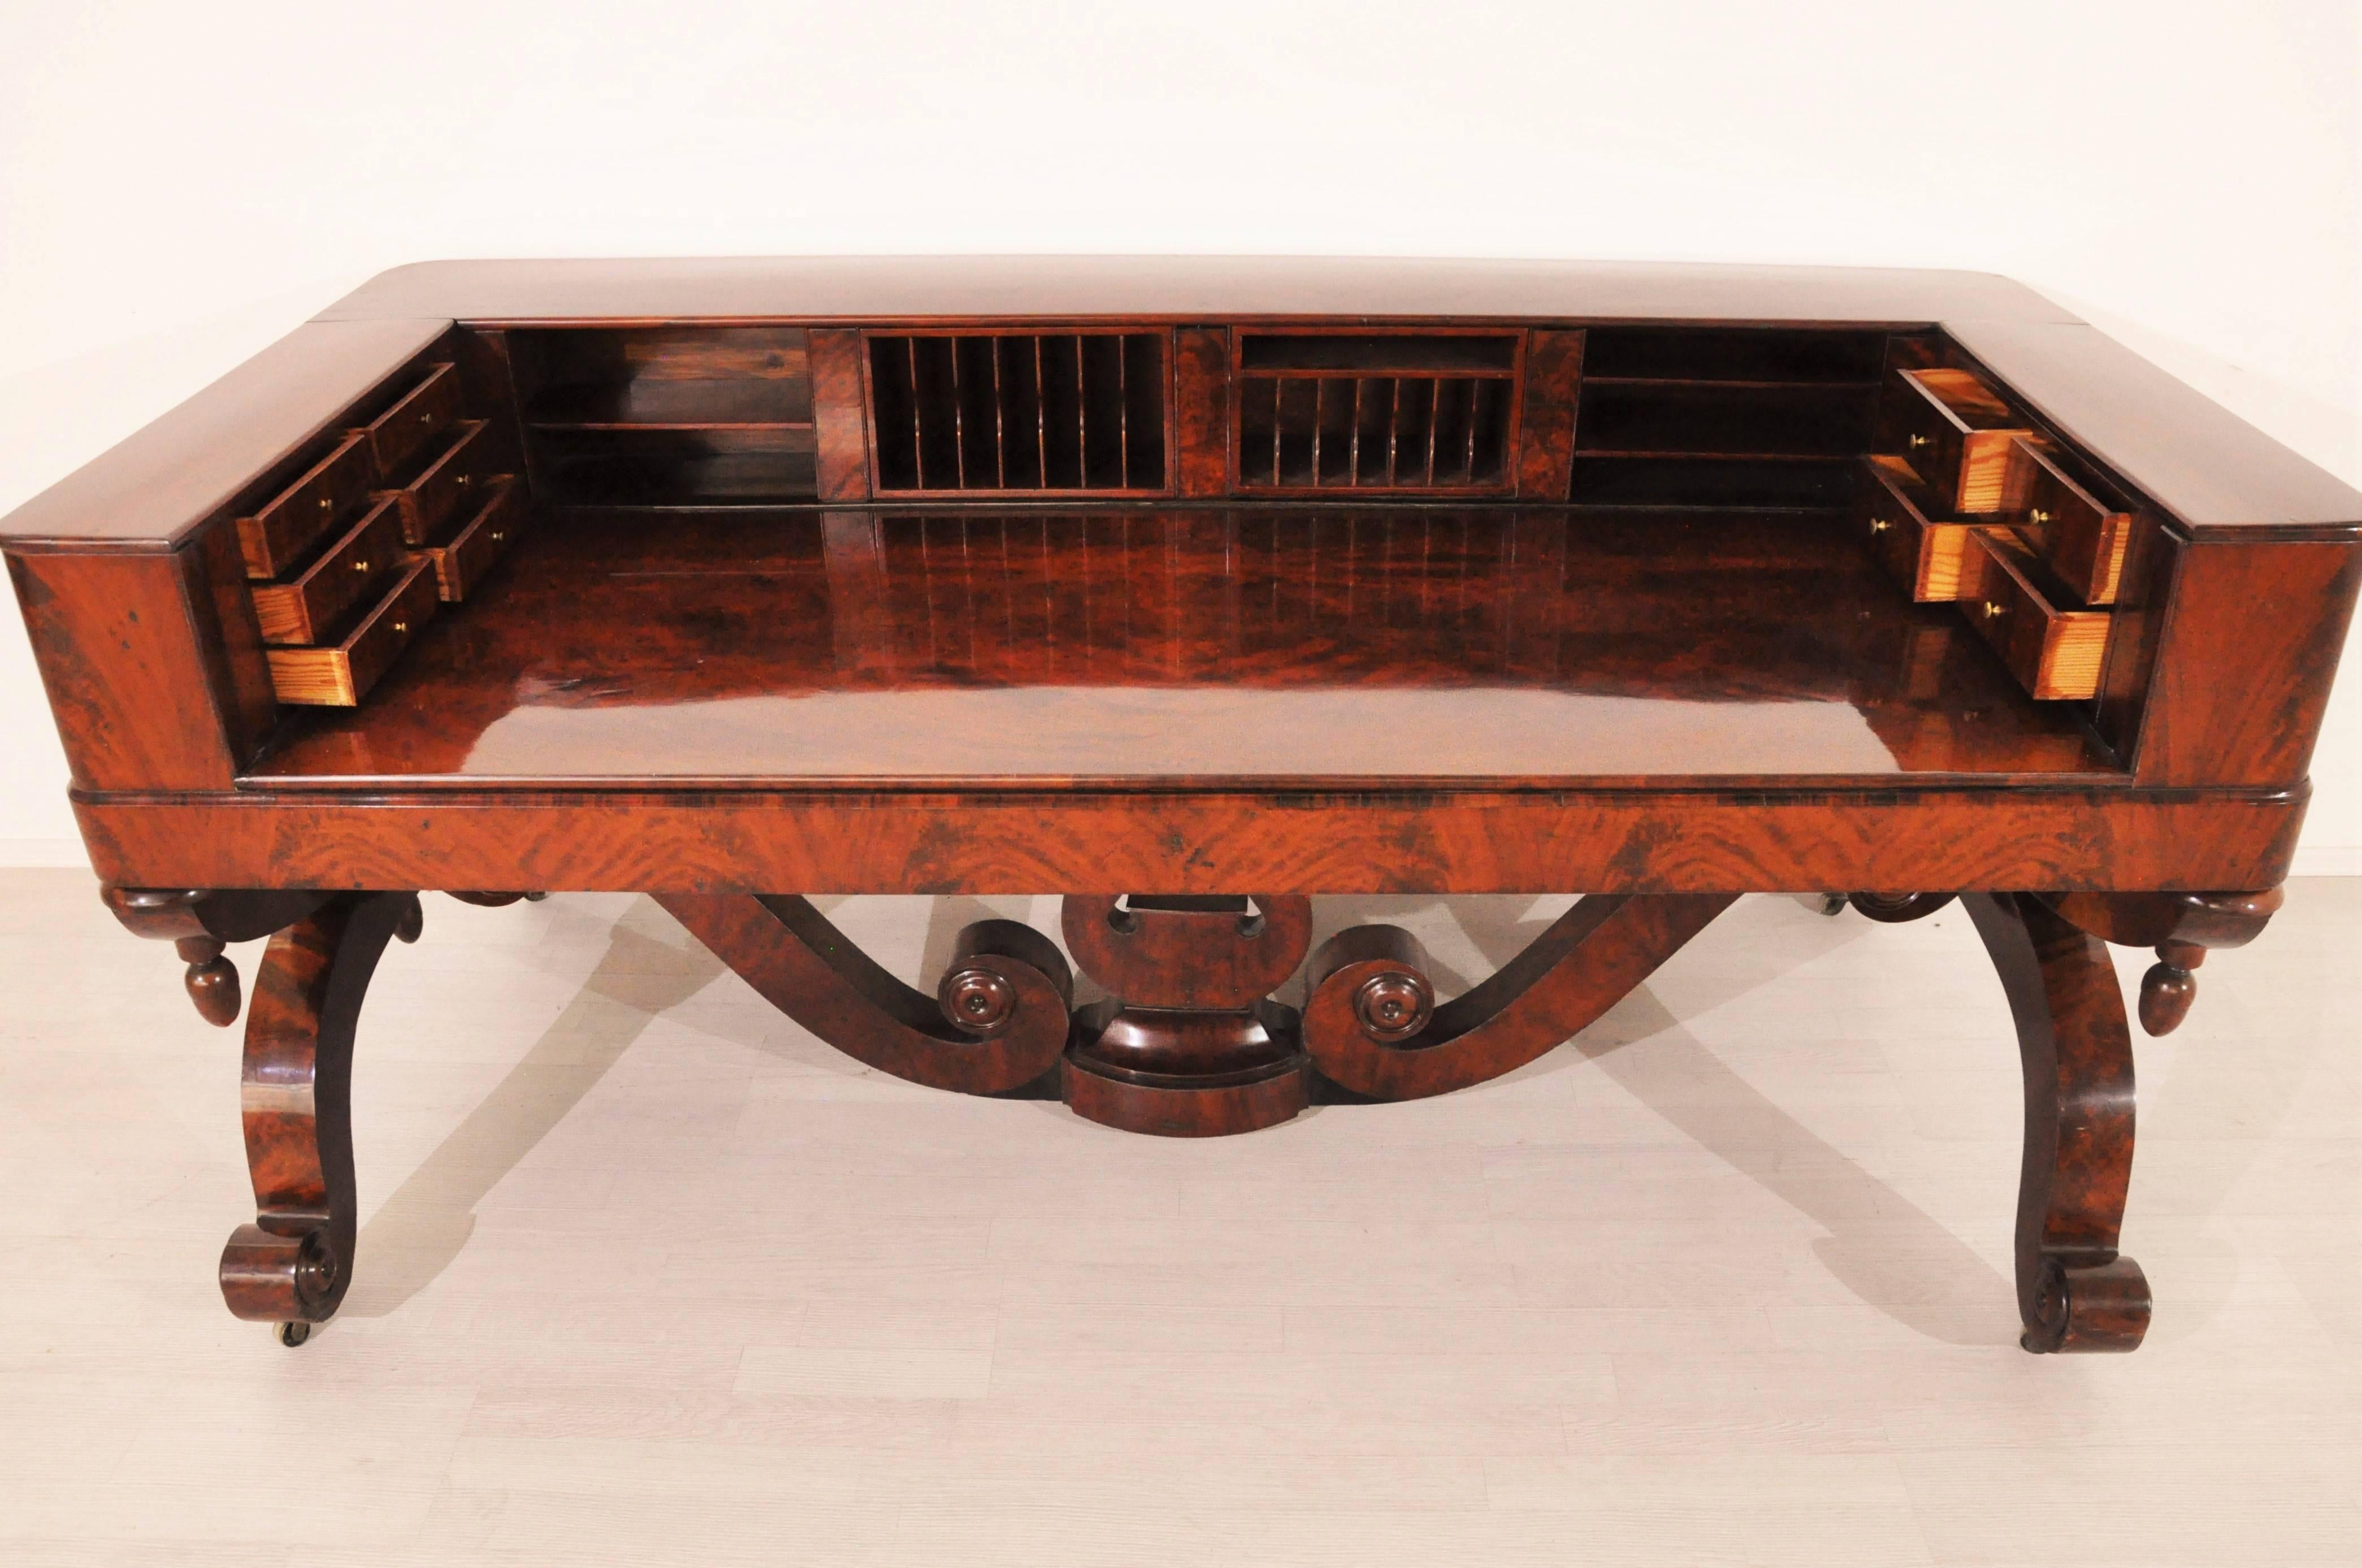 Unique large 1830s Biedermeier mahogany desk from northern germany. It offers a pyramid mahogany veneer on the front and back and wonderful detailed and hand crafted feet. On the tabletop you will find a lot of small drawers with original brass